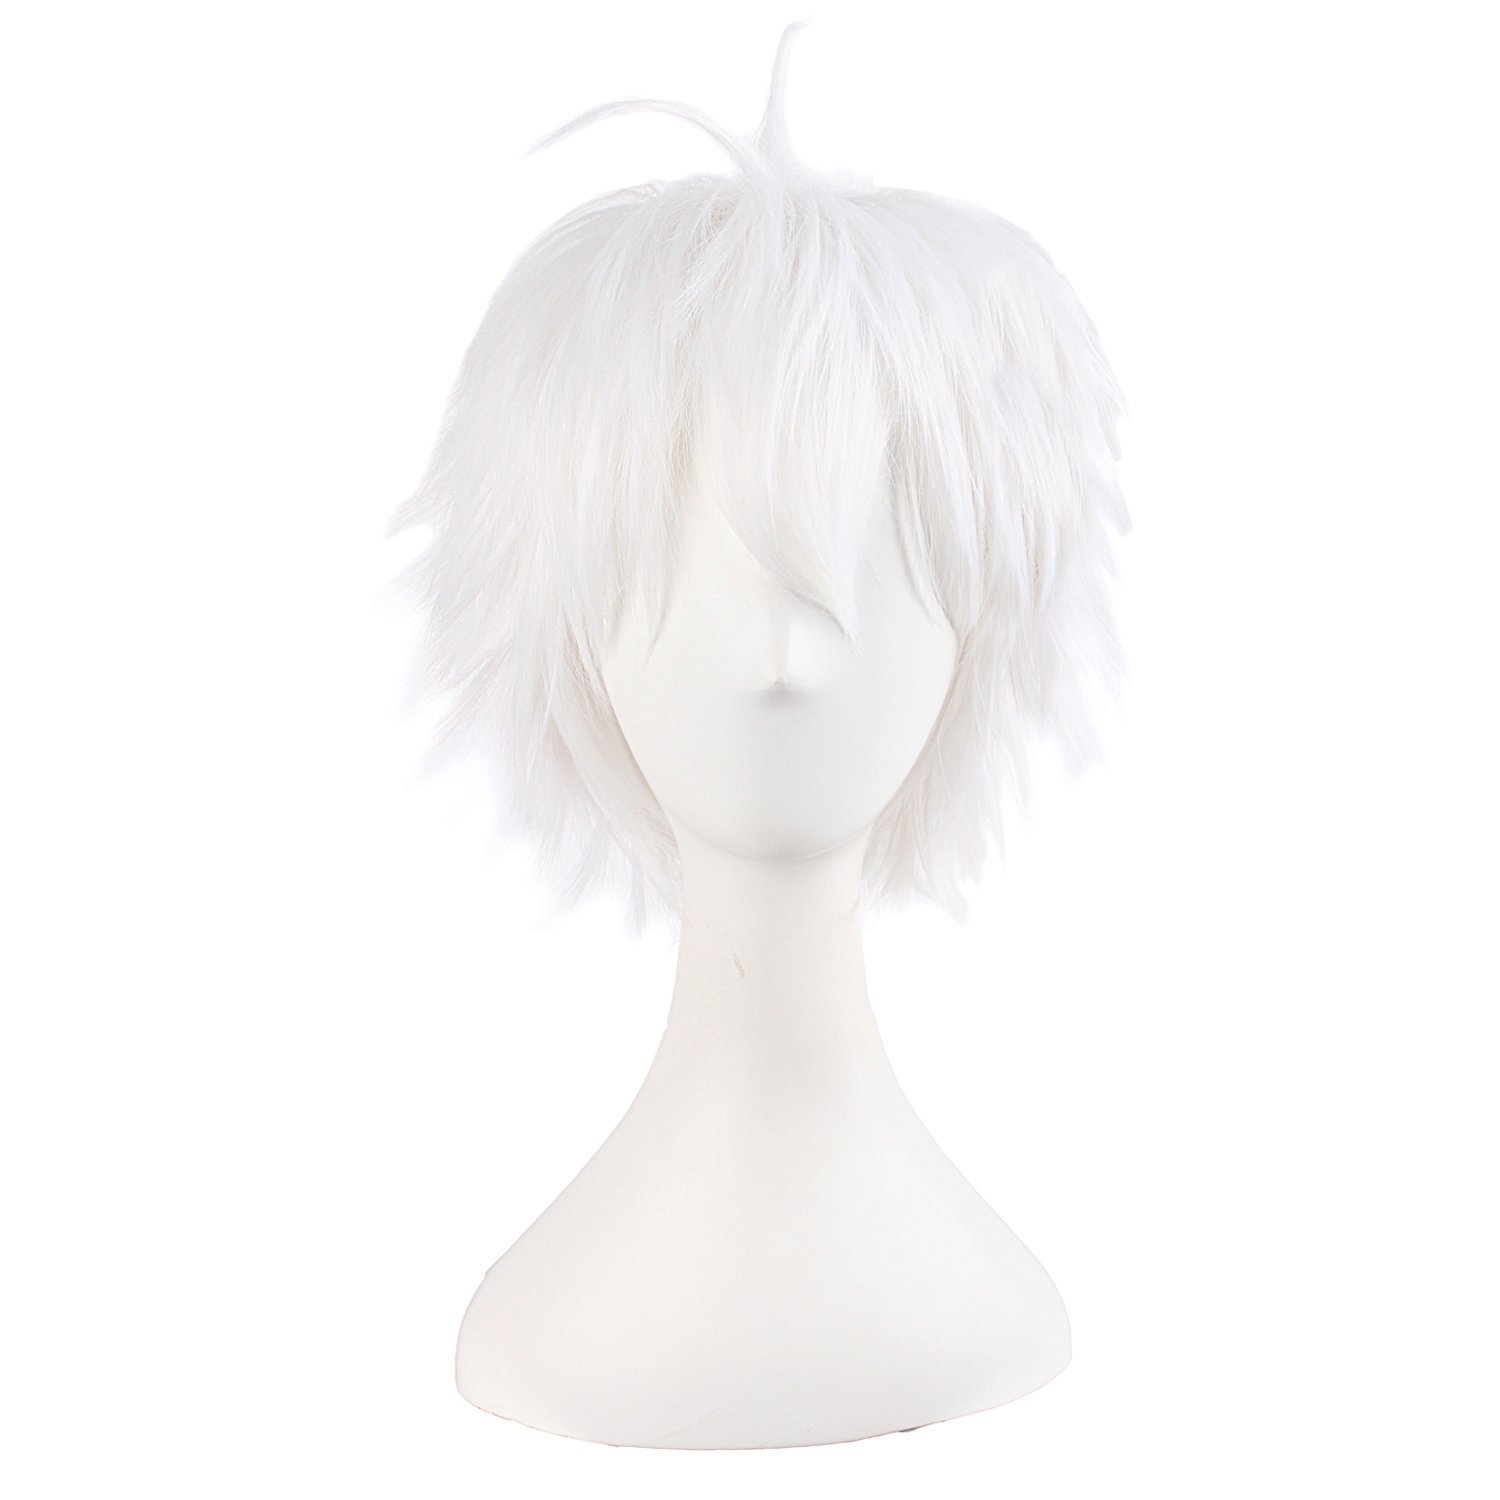 Price:$14.99    MapofBeauty 14"/35cm Men With Short Hair Tied Ponytail Cosplay Party Wigs (White)  Beauty